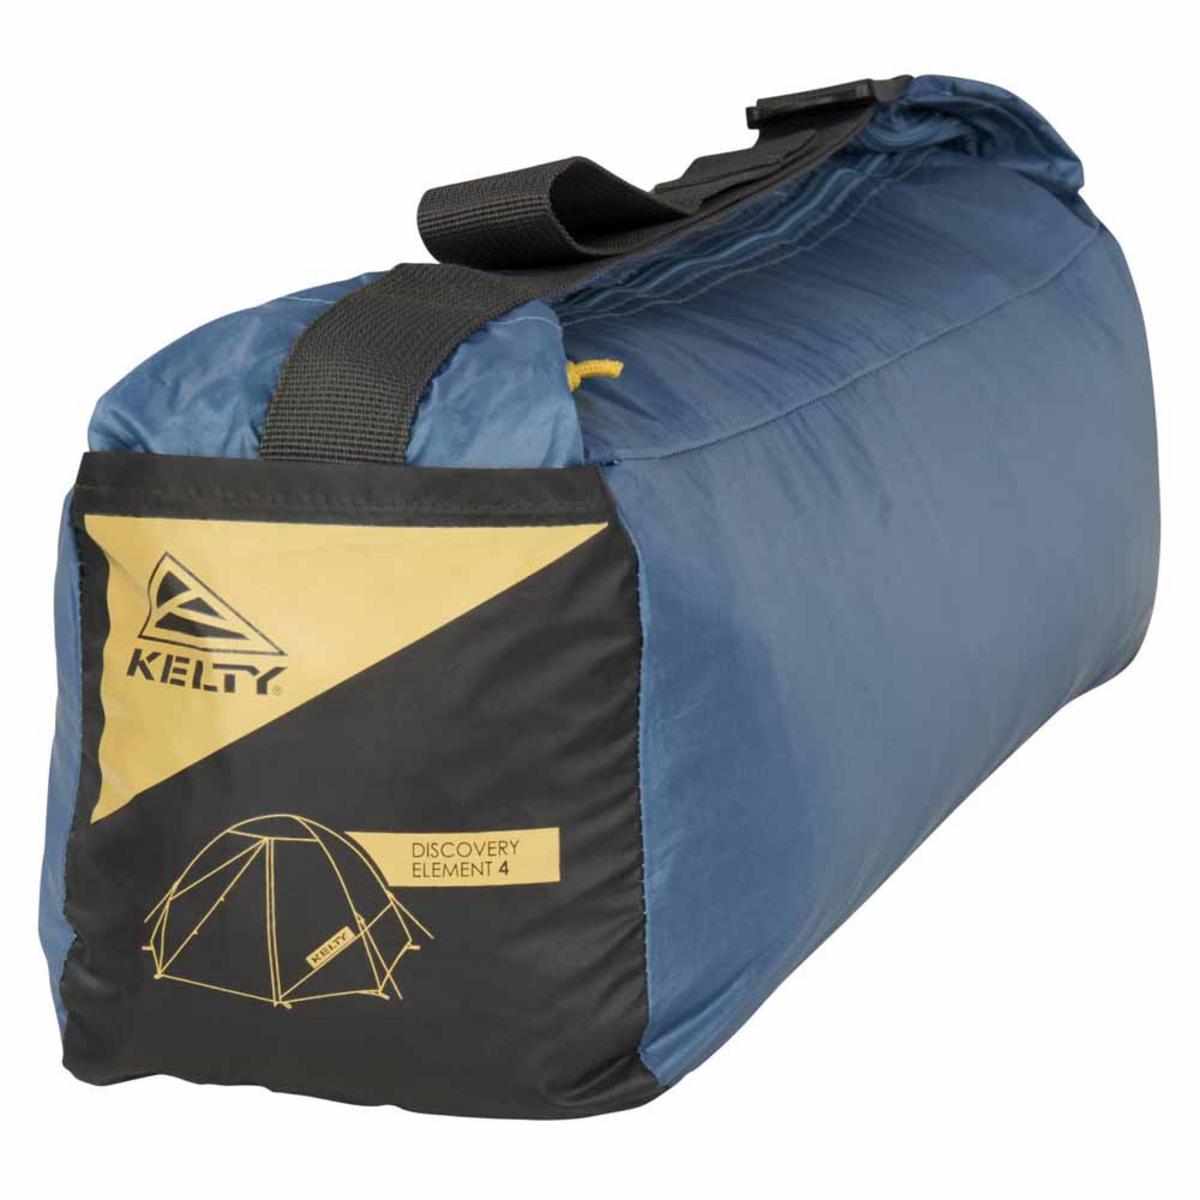 Kelty Discovery Element 4 Person Tent - Iceberg Green/Agean Blue